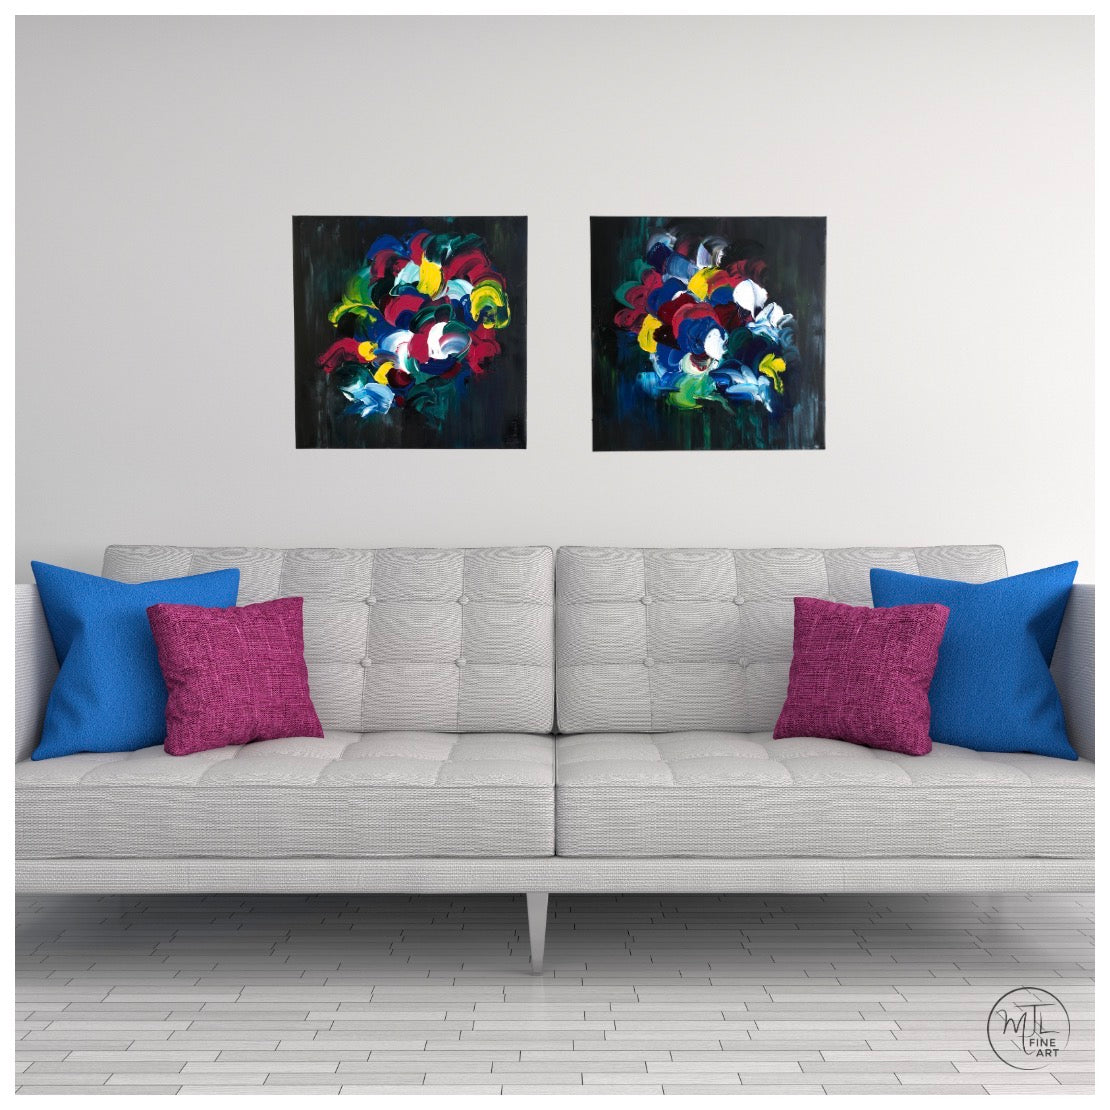 commission of two 20" x 20" oil on canvas paintings with dark background and jewel tones abstract flowers in the center